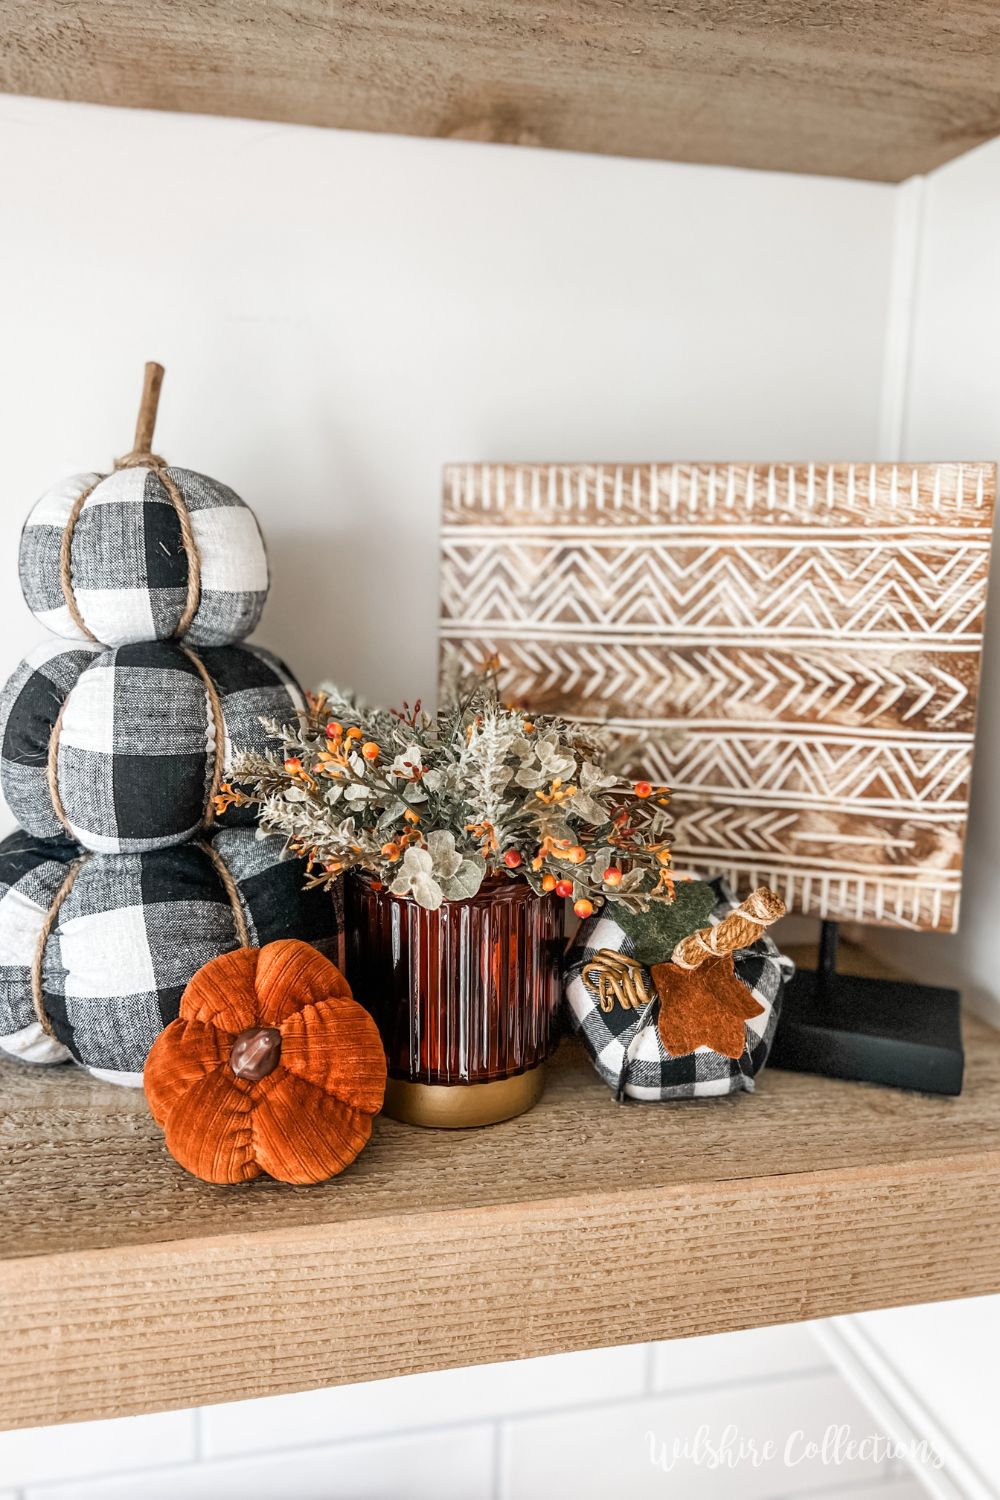 Fall coffee bar ideas - Wilshire Collections